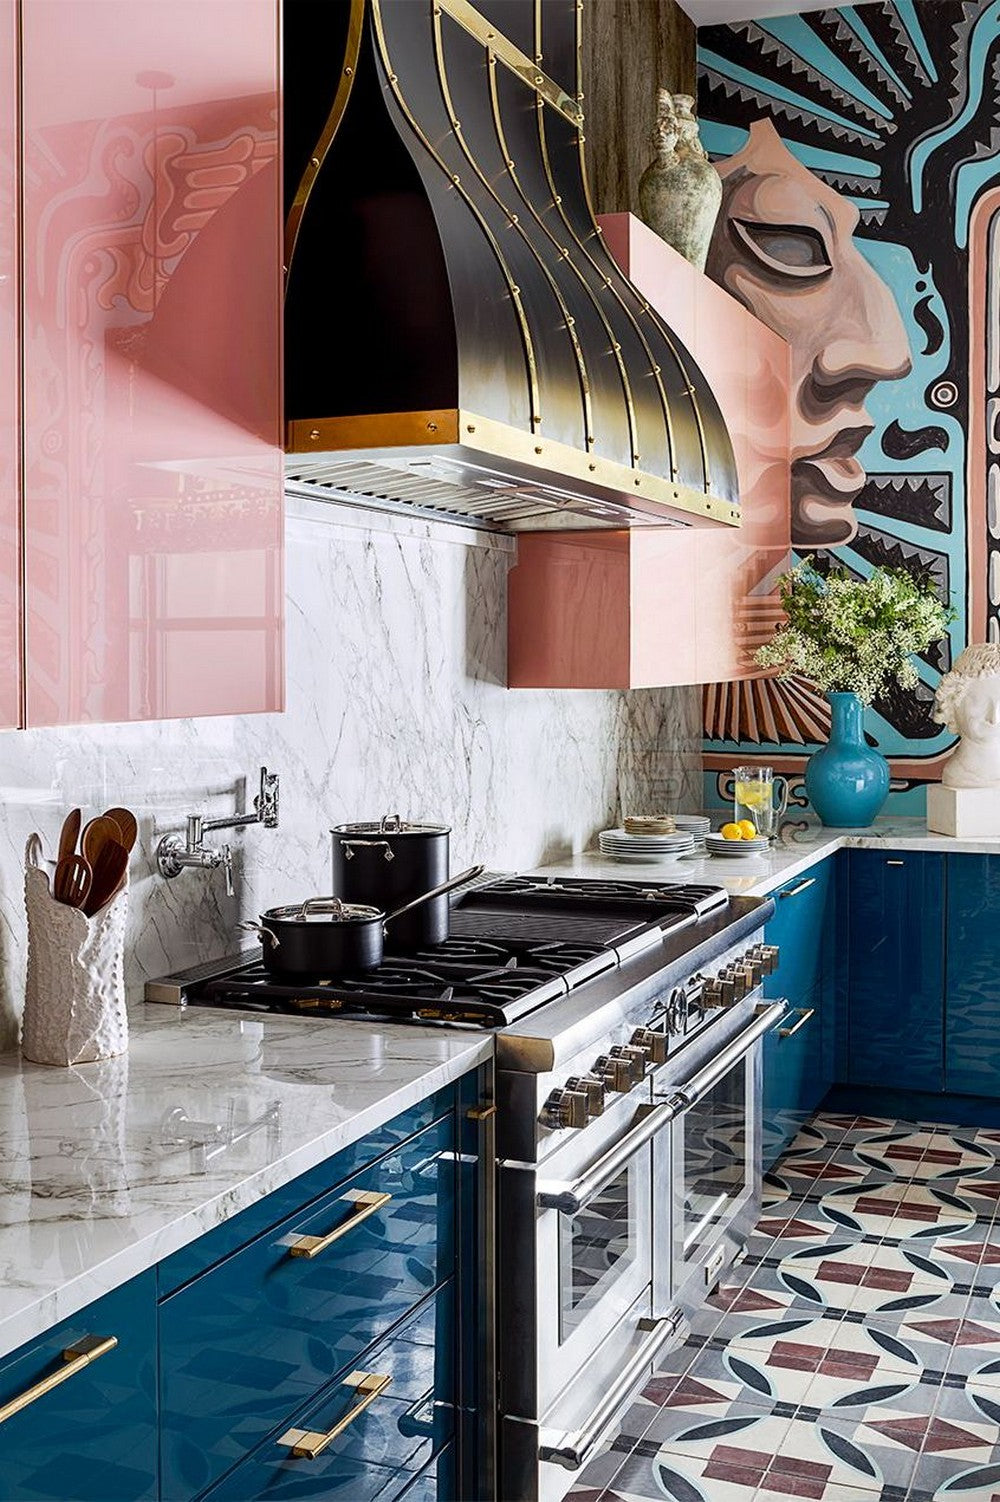 FASHION YOUR LUXURY KITCHEN WITH THESE ASTOUNDING CABINET PAINT COLORS